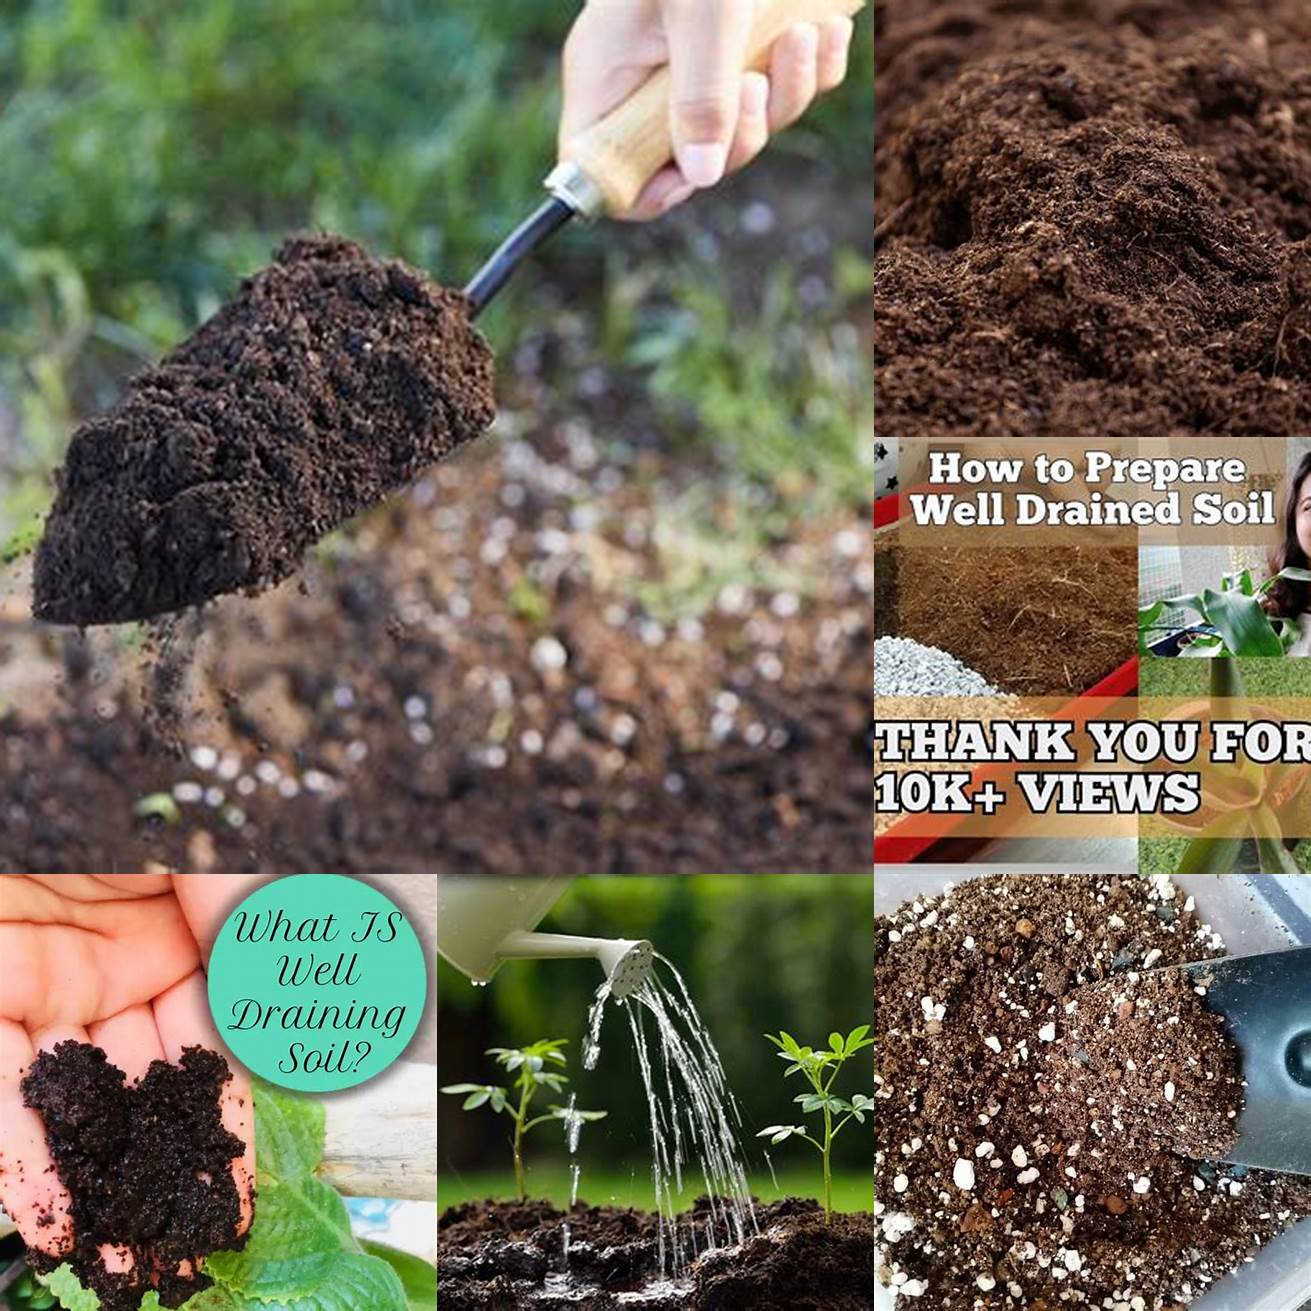 Use a well-draining and nutrient-rich soil